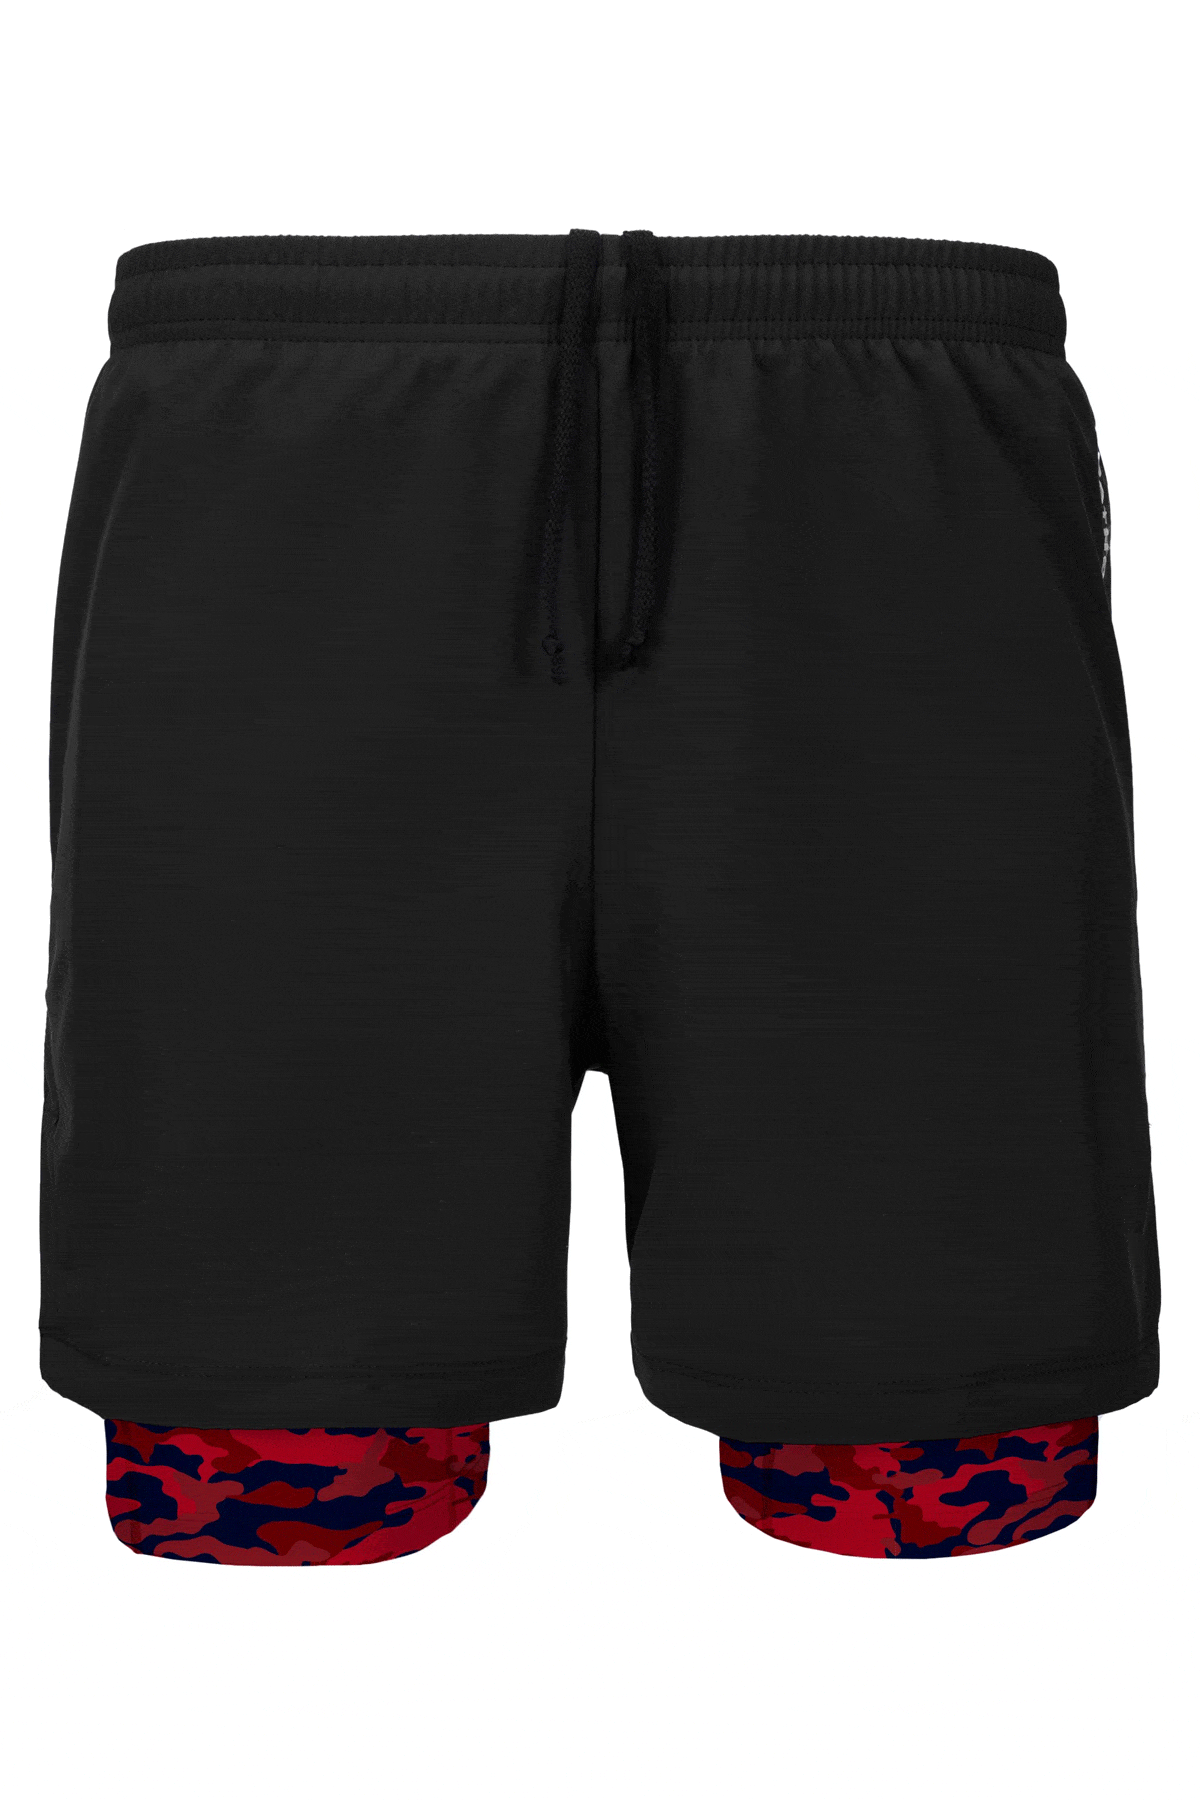 New sports shorts men's double-layer jogging two-in-one shorts